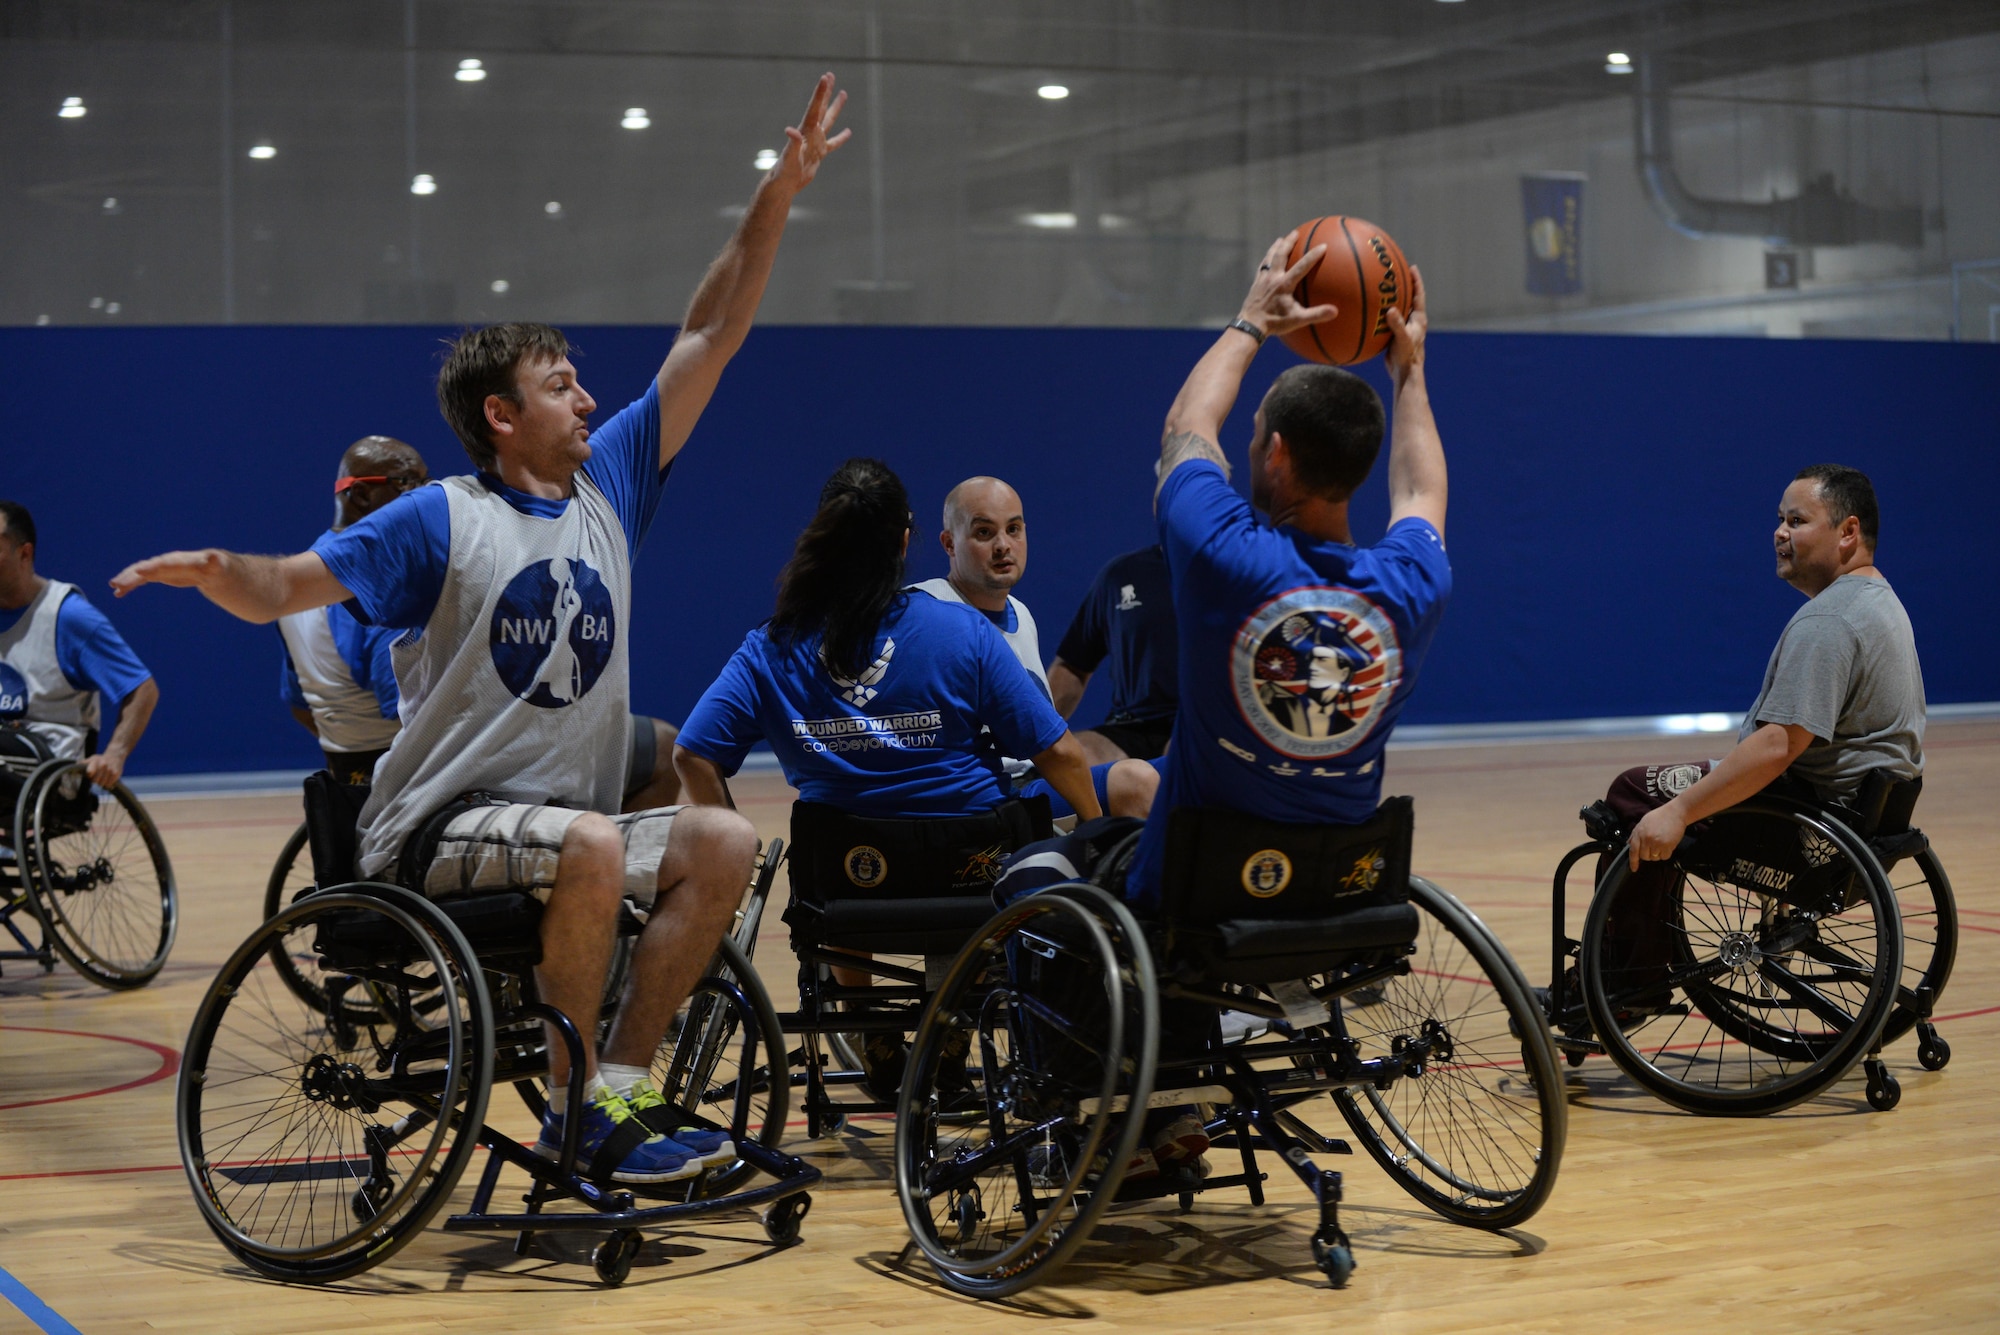 Wounded Warriors play seated basketball in the Offutt Field House at Offutt Air Force Base, Neb., Sept. 21, 2016. The base hosted a four day long training camp for wounded warriors to train in preparation for their yearly competition in June. (U.S. Air Force photo by Zachary Hada)